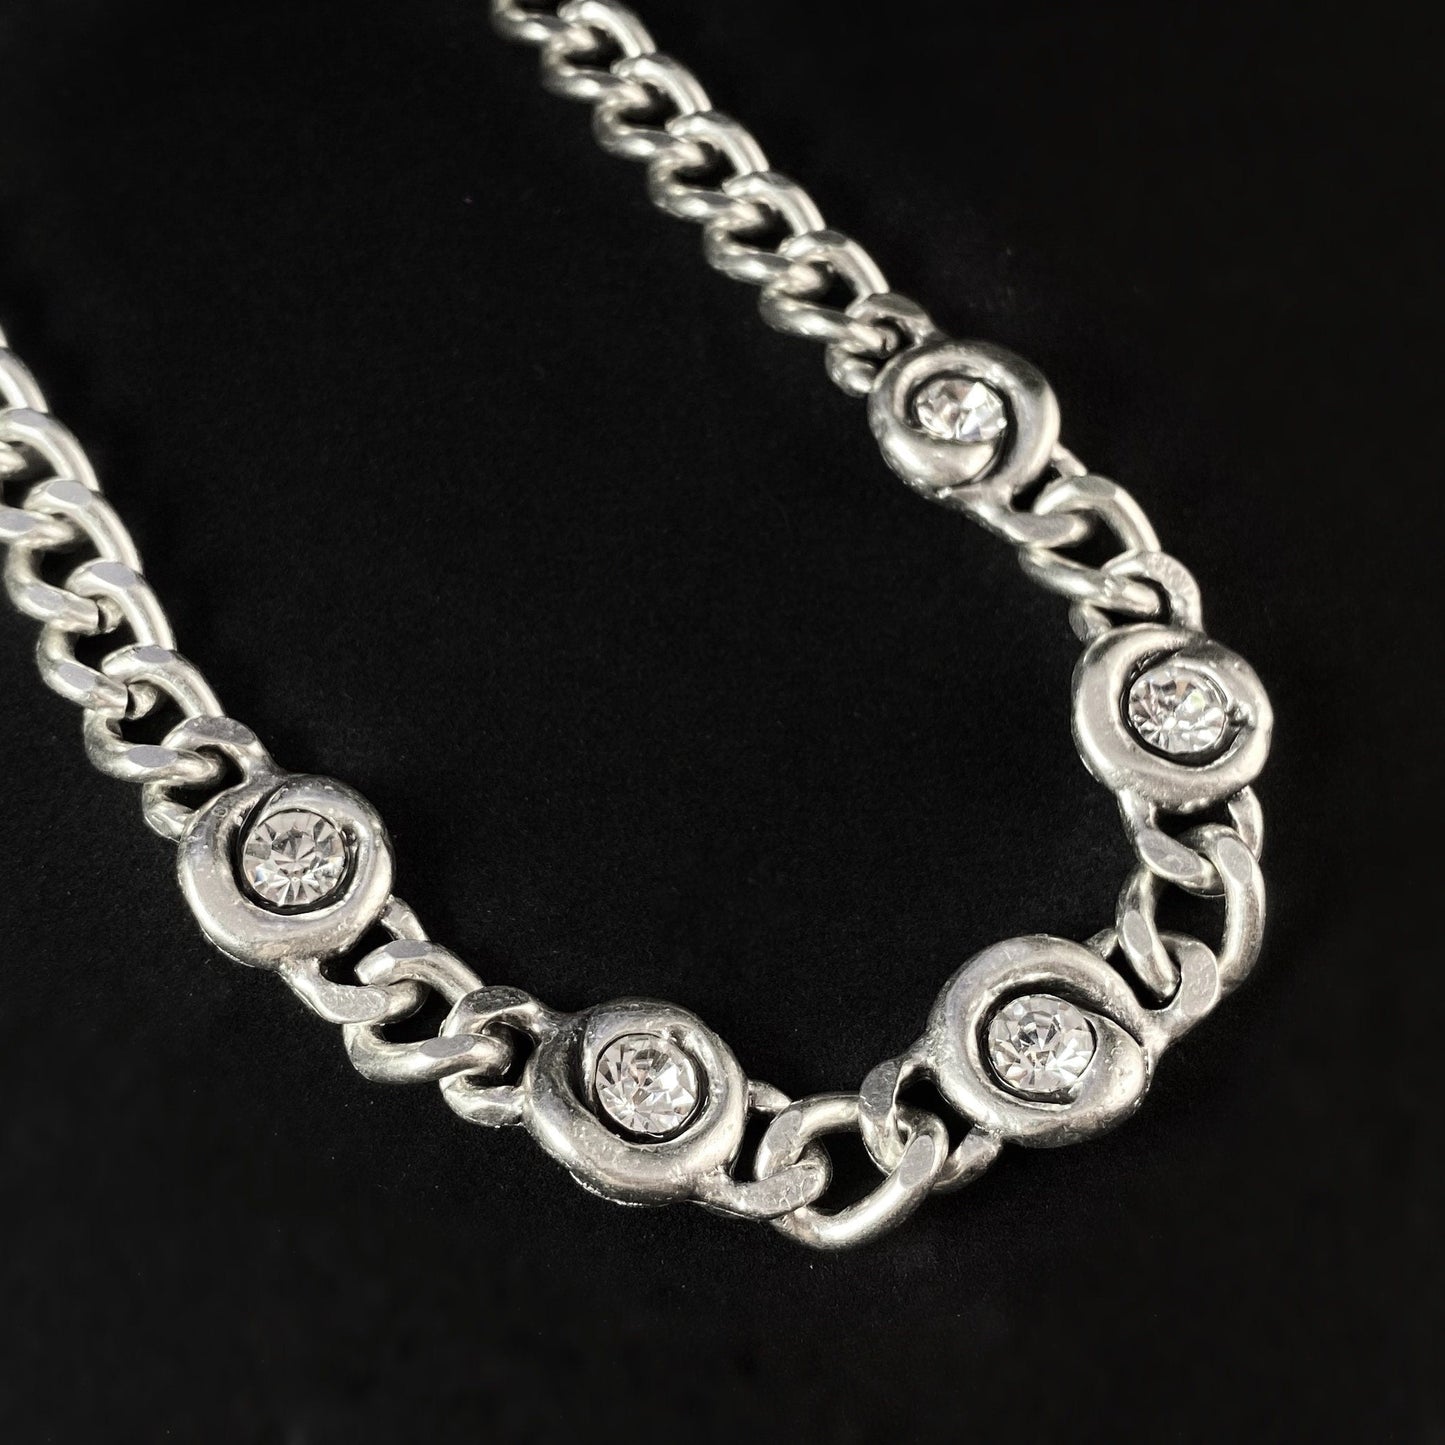 Silver Necklace with Clear Crystals, Handmade, Nickel Free